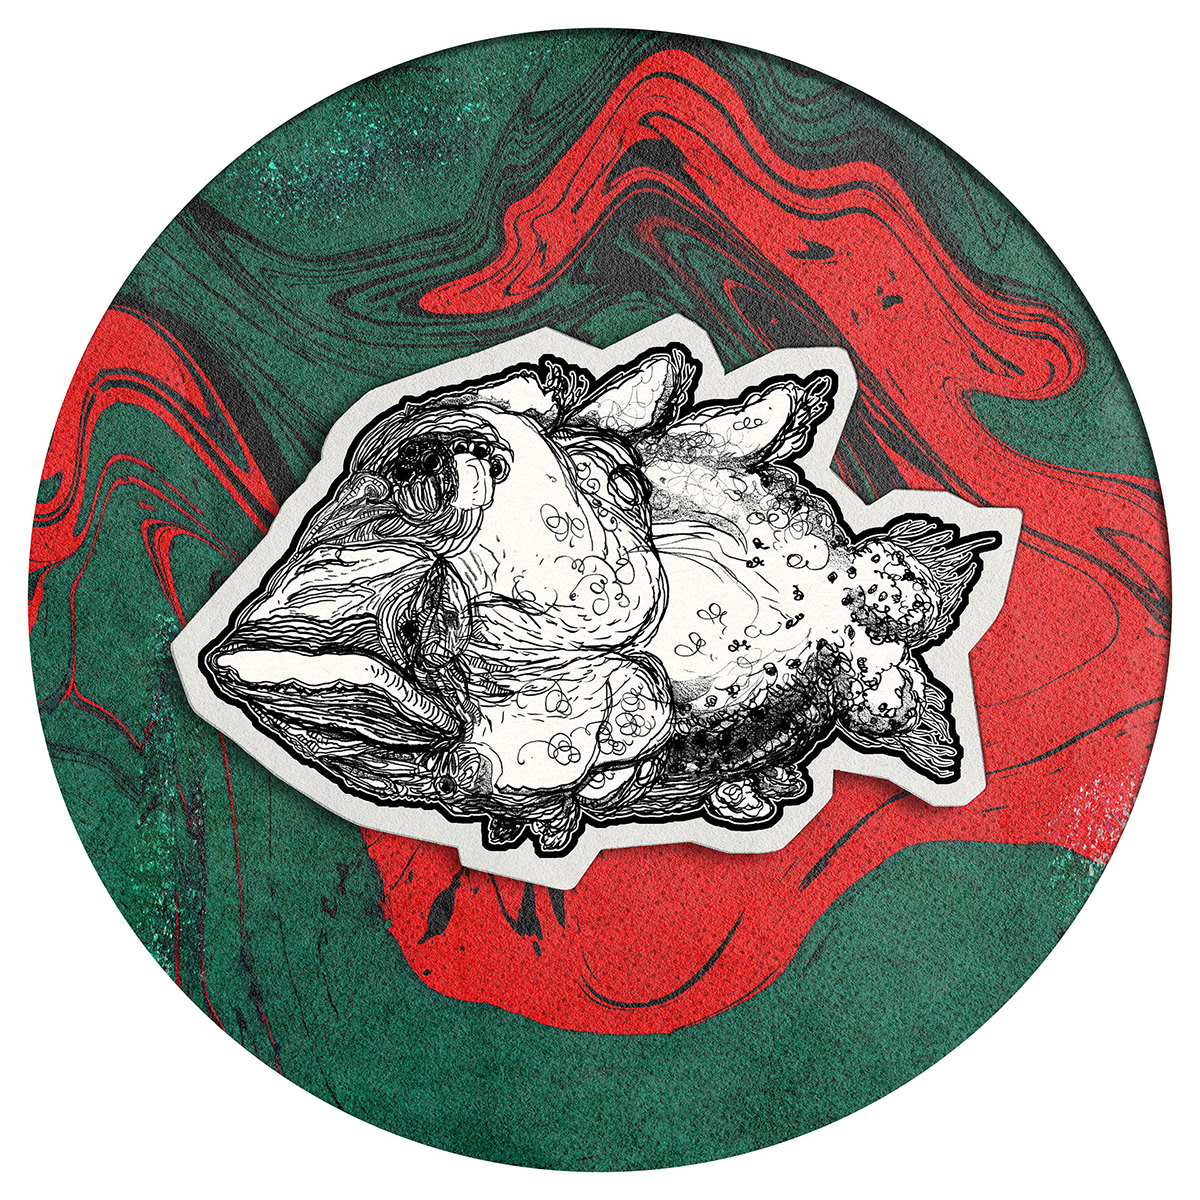 Peculiar fish drawn with intricate graphite lines and patterns placed on a psychedelic liquid circle